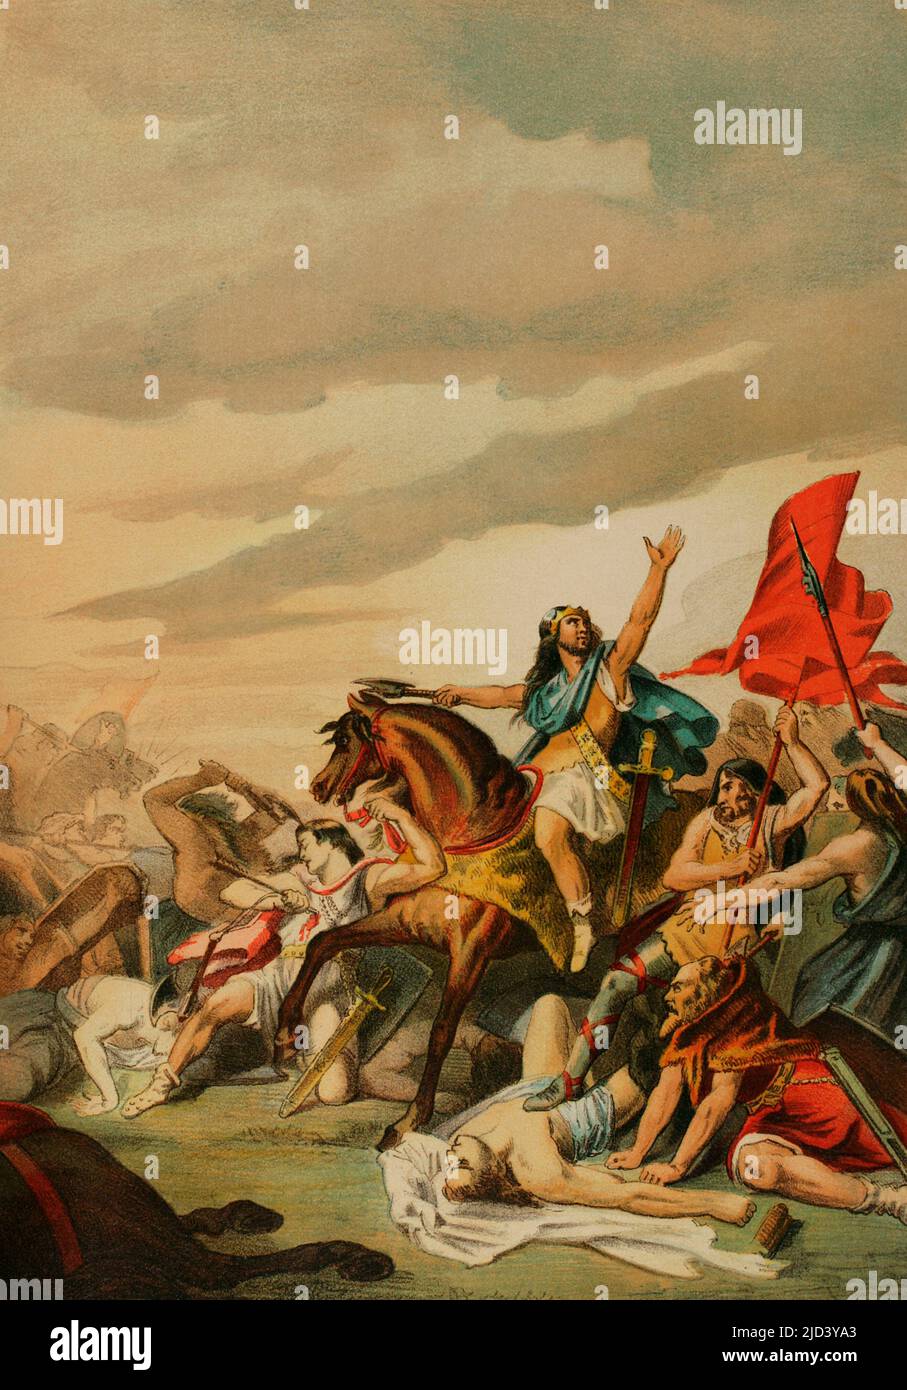 Battle of Tolbiac (496). Confrontation between Franks and Alemanni. Ancient Gaul, near Cologne (Germany). Clovis I, King of the Franks, defeated the Alemanni. Chromolithography. 'Historia Universal' (Universal History), by César Cantú. Volume IV. Published in Barcelona, 1881. Stock Photo